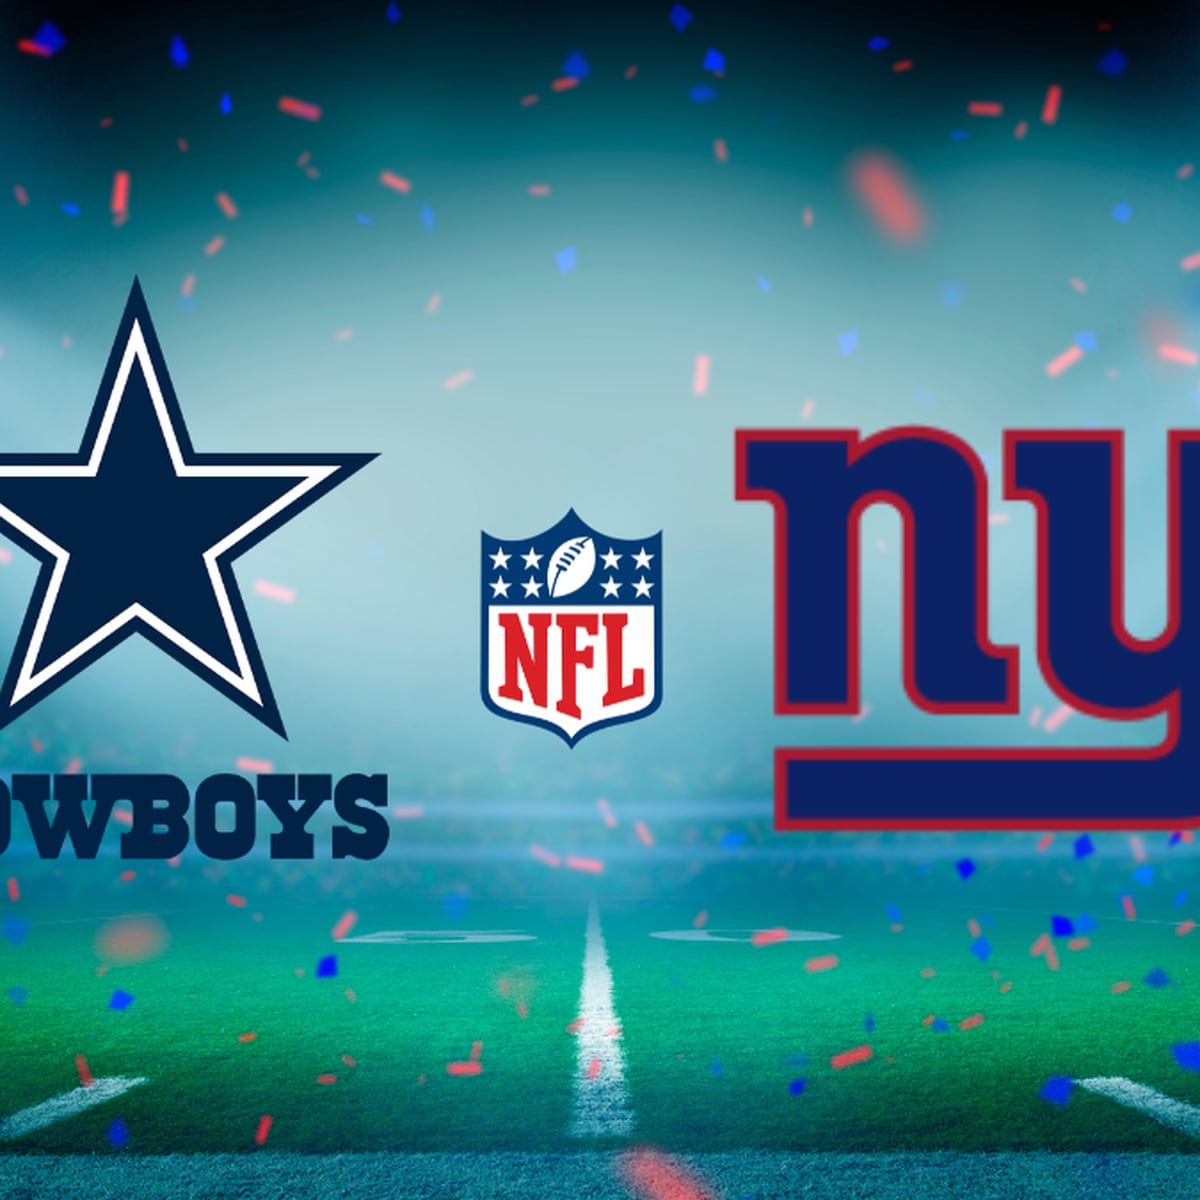 Dallas Cowboys - New York Giants: Game time, TV Schedule and where